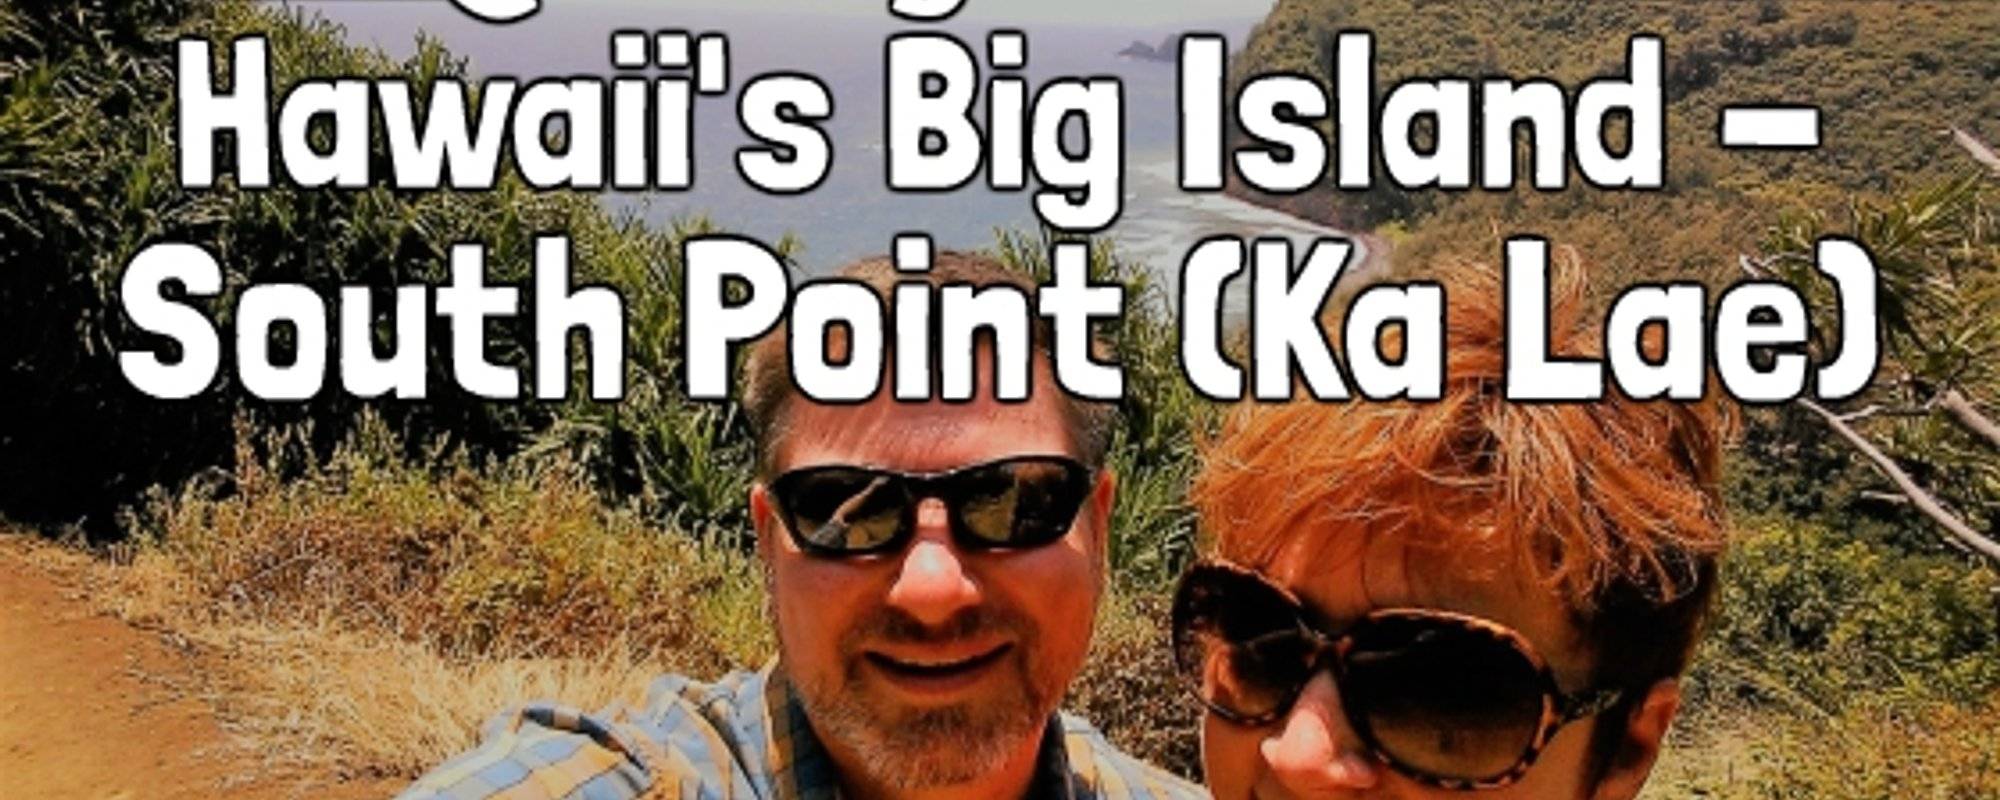 Qberry Travels: Hawaii's Big Isand Series - Kalae (South Point) Cliffdiving